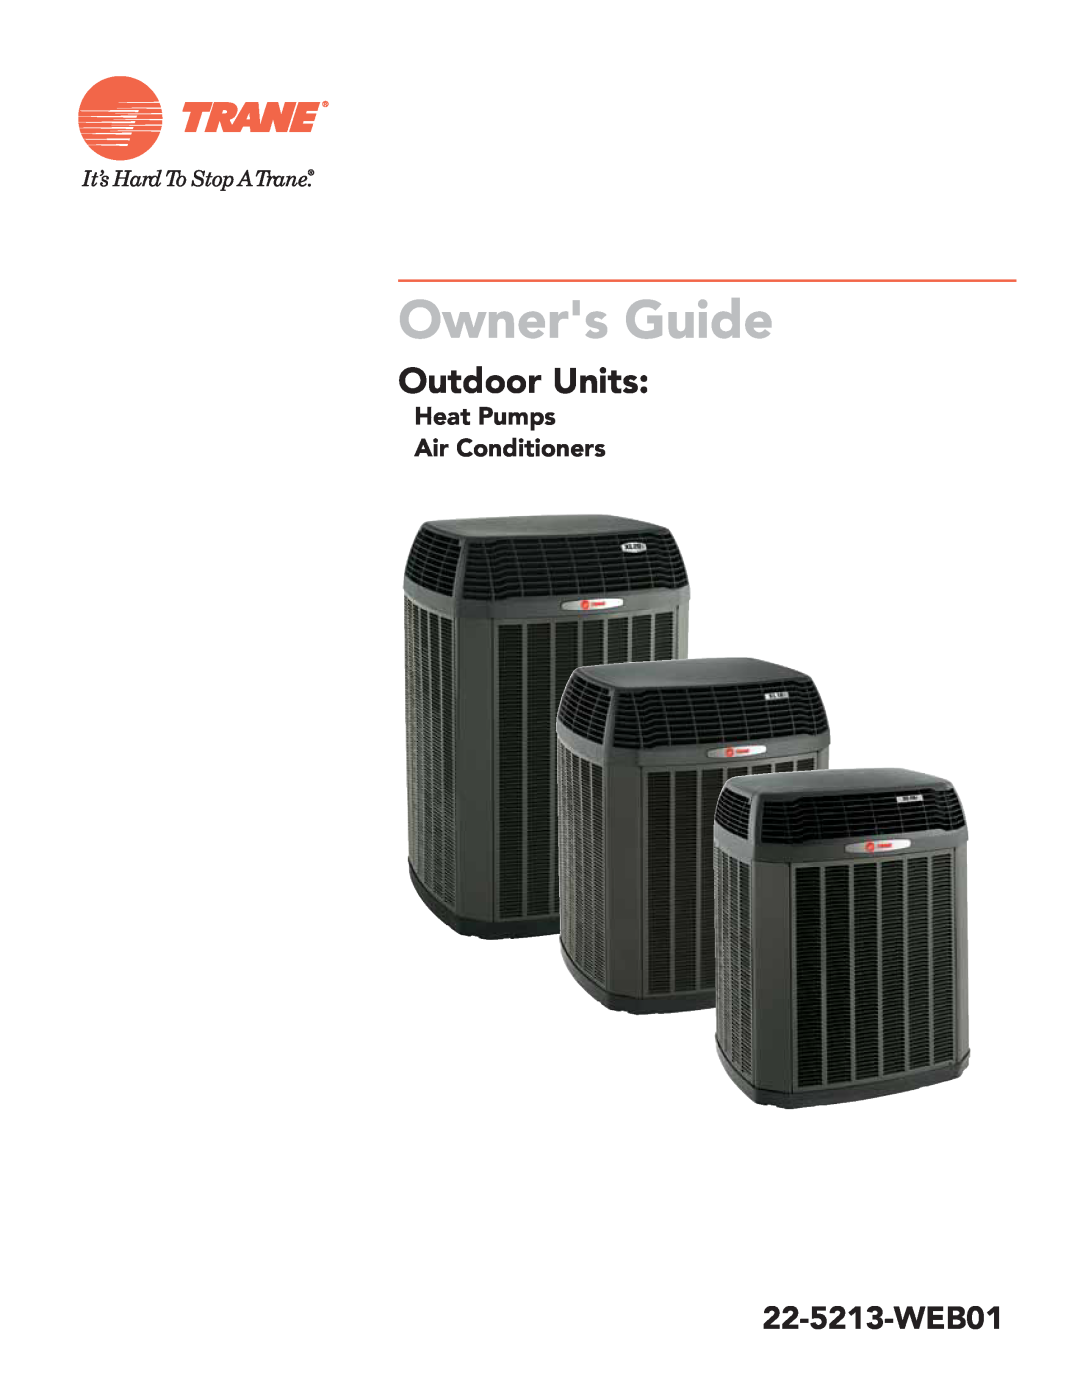 Trane Trane Outdoor Units: Heat Pumps, Air Conditioners manual Owners Guide, 22-5213-WEB01, Heat Pumps Air Conditioners 